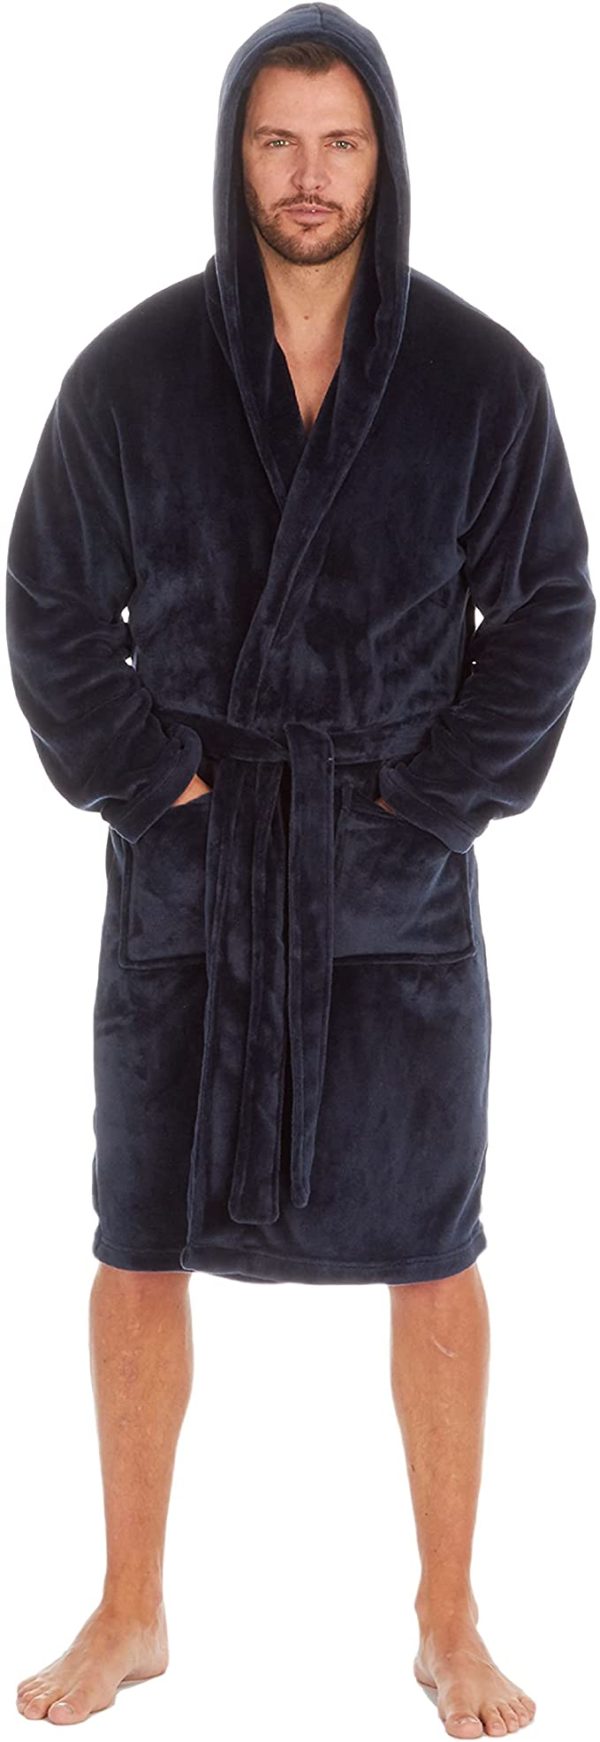 Mens Adult Plus Size Big and Tall Dressing Gown Bath Robe up to 5XL